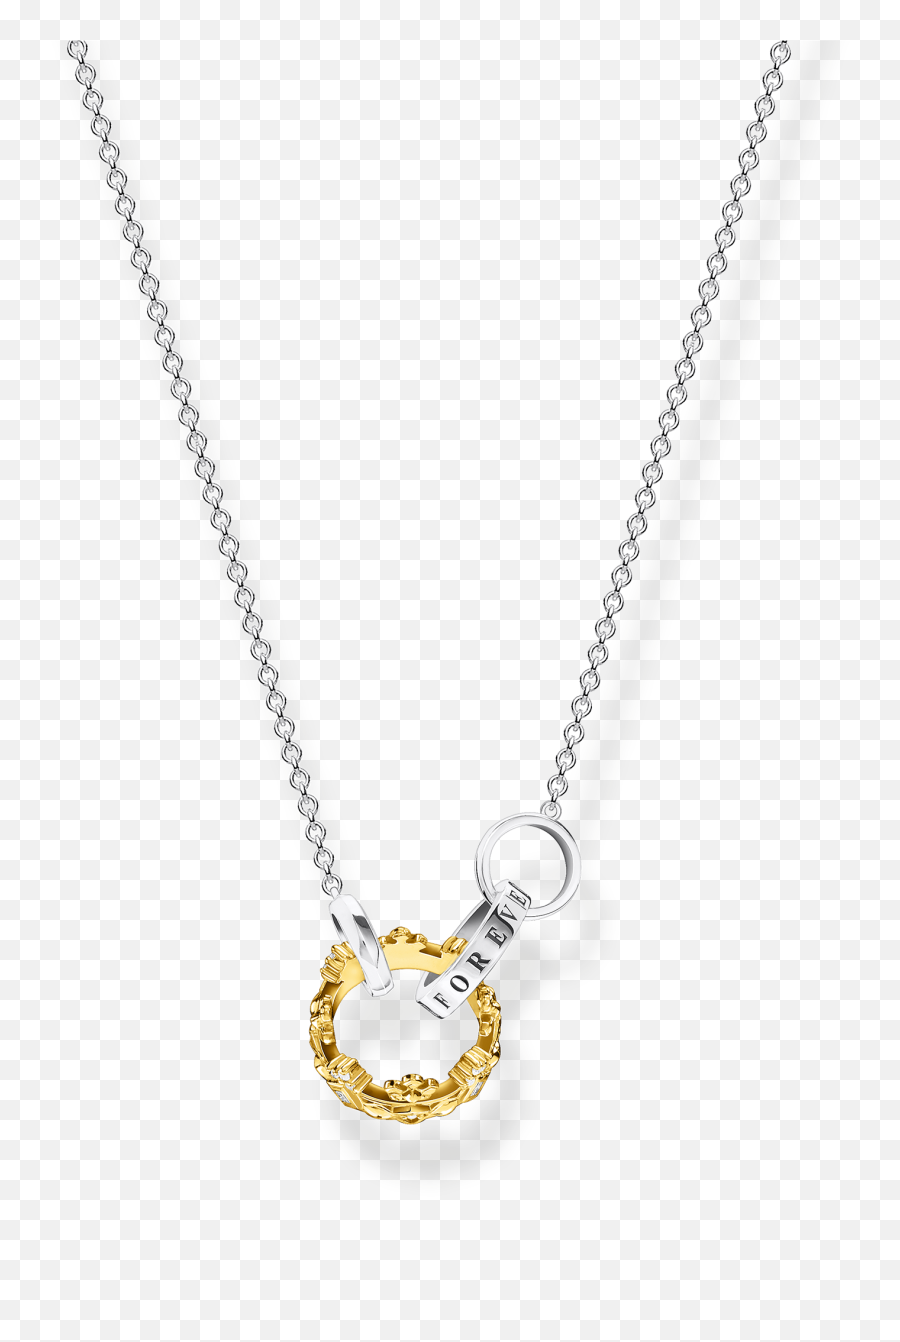 The Ultimate Mothers Day 2021 Gift Guide - Thomas Sabo Necklace Crown Emoji,Sun And Moon Emoji Necklaces